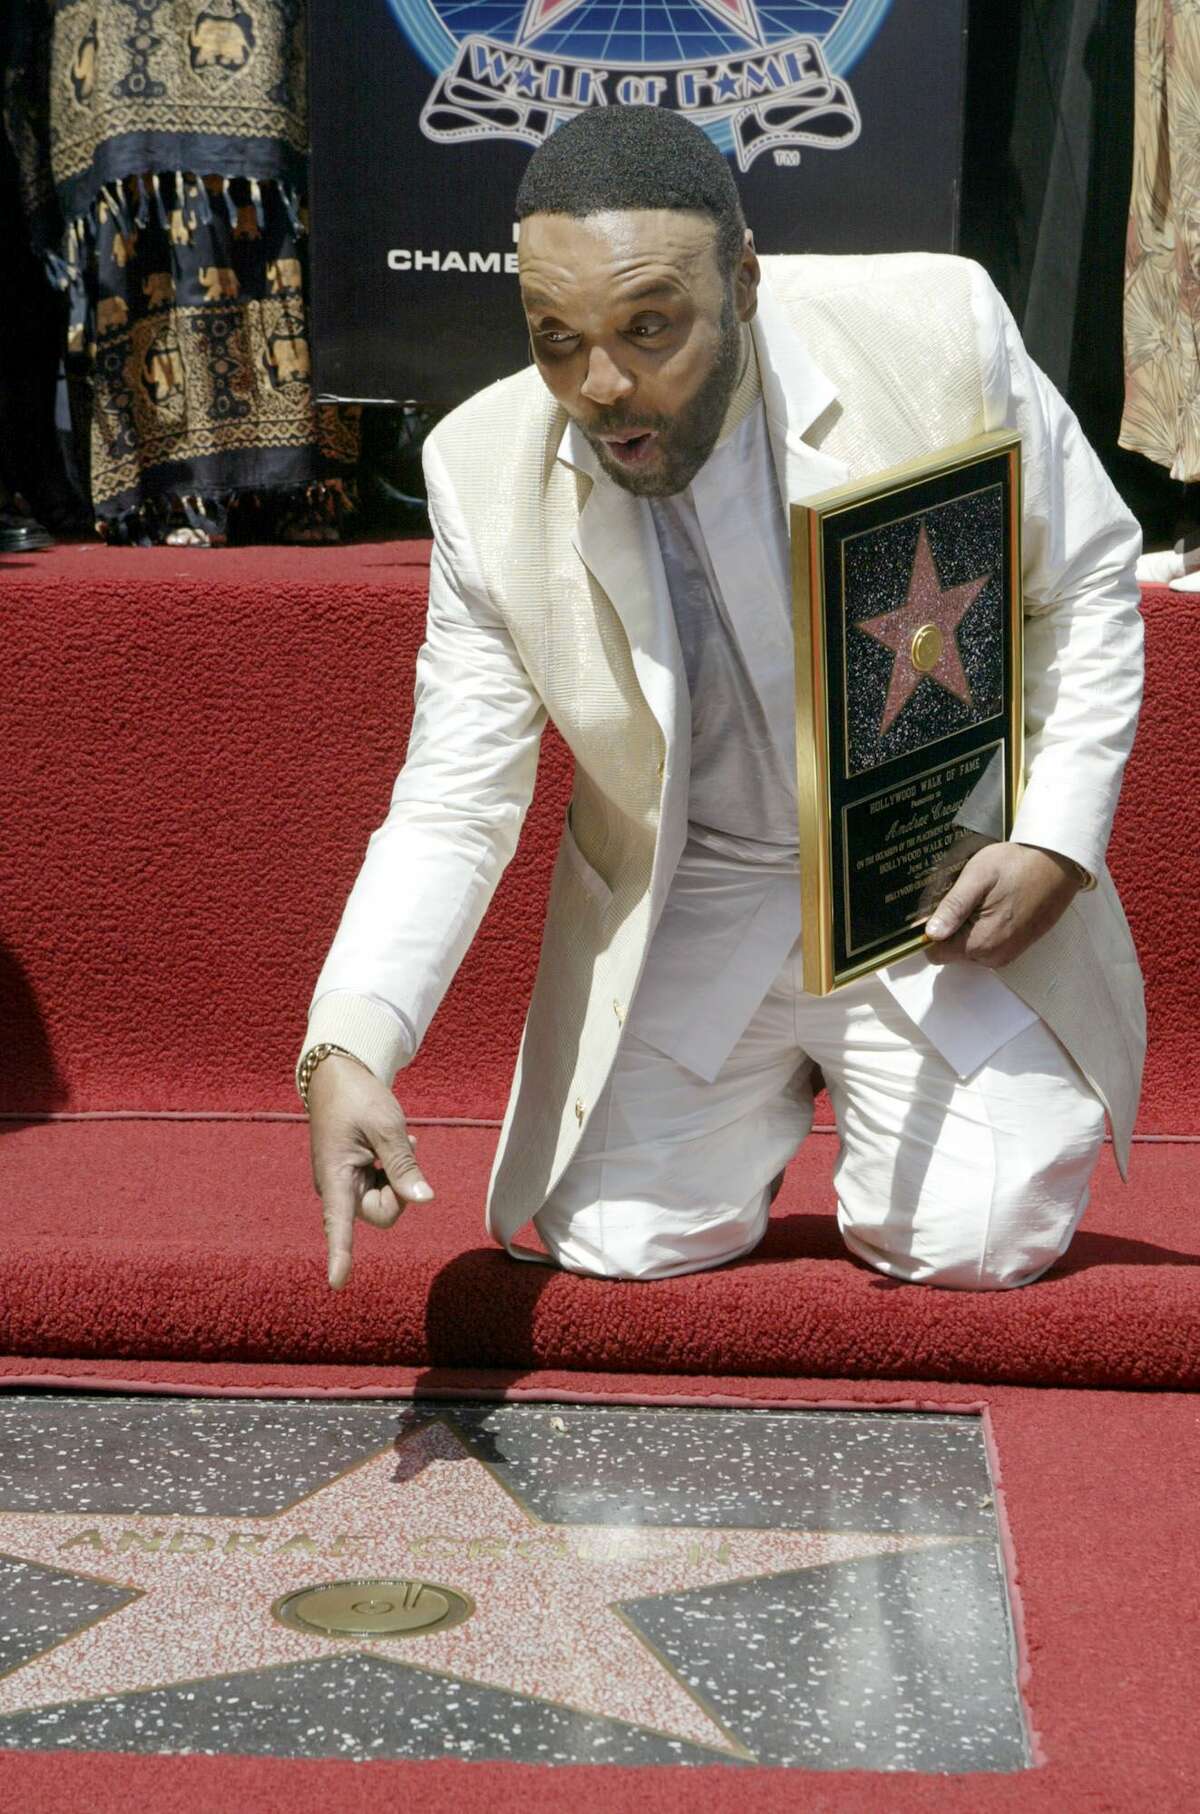 FILE - In this June 4, 2004 file photo, Grammy-winning gospel singer Andrae Crouch poses for a photo at a ceremony honoring him with the 2,256nd star on the Hollywood Walk of Fame in Los Angeles. Crouch, a legendary gospel performer, songwriter and choir director whose work graced songs by Michael Jackson and Madonna and movies such as ìThe Lion King,î has died at age 72. His publicist says Crouch died Thursday, Jan. 8, 2015, at a hospital in Los Angeles, where he was admitted Saturday after suffering a heart attack. (AP Photo/Nick Ut, File)